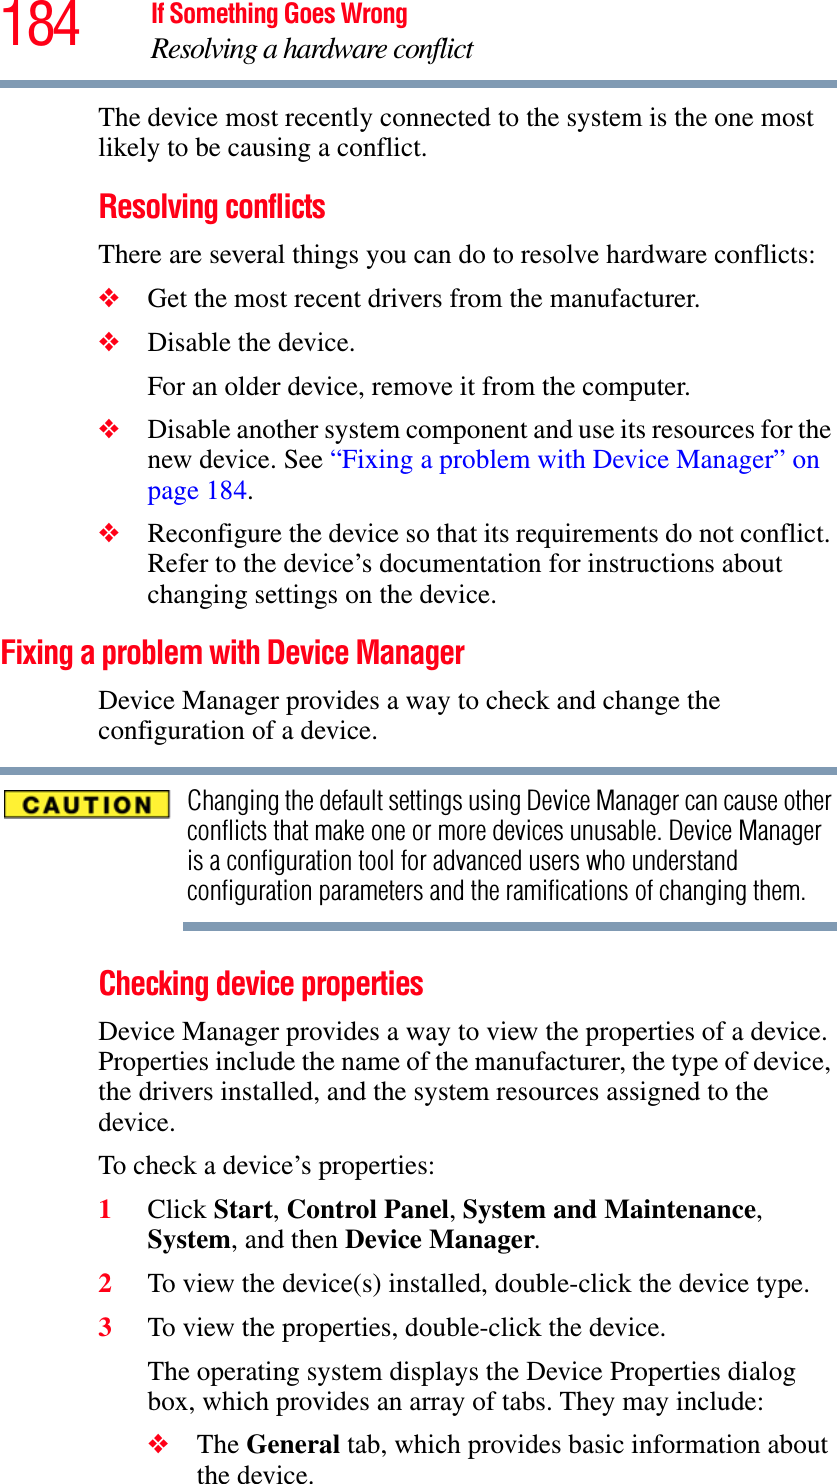 184 If Something Goes WrongResolving a hardware conflictThe device most recently connected to the system is the one most likely to be causing a conflict.Resolving conflictsThere are several things you can do to resolve hardware conflicts:❖Get the most recent drivers from the manufacturer.❖Disable the device.For an older device, remove it from the computer.❖Disable another system component and use its resources for the new device. See “Fixing a problem with Device Manager” on page 184.❖Reconfigure the device so that its requirements do not conflict. Refer to the device’s documentation for instructions about changing settings on the device.Fixing a problem with Device Manager Device Manager provides a way to check and change the configuration of a device.Changing the default settings using Device Manager can cause other conflicts that make one or more devices unusable. Device Manager is a configuration tool for advanced users who understand configuration parameters and the ramifications of changing them.Checking device propertiesDevice Manager provides a way to view the properties of a device. Properties include the name of the manufacturer, the type of device, the drivers installed, and the system resources assigned to the device. To check a device’s properties:1Click Start,Control Panel,System and Maintenance,System, and then Device Manager.2To view the device(s) installed, double-click the device type.3To view the properties, double-click the device.The operating system displays the Device Properties dialog box, which provides an array of tabs. They may include:❖The General tab, which provides basic information about the device.